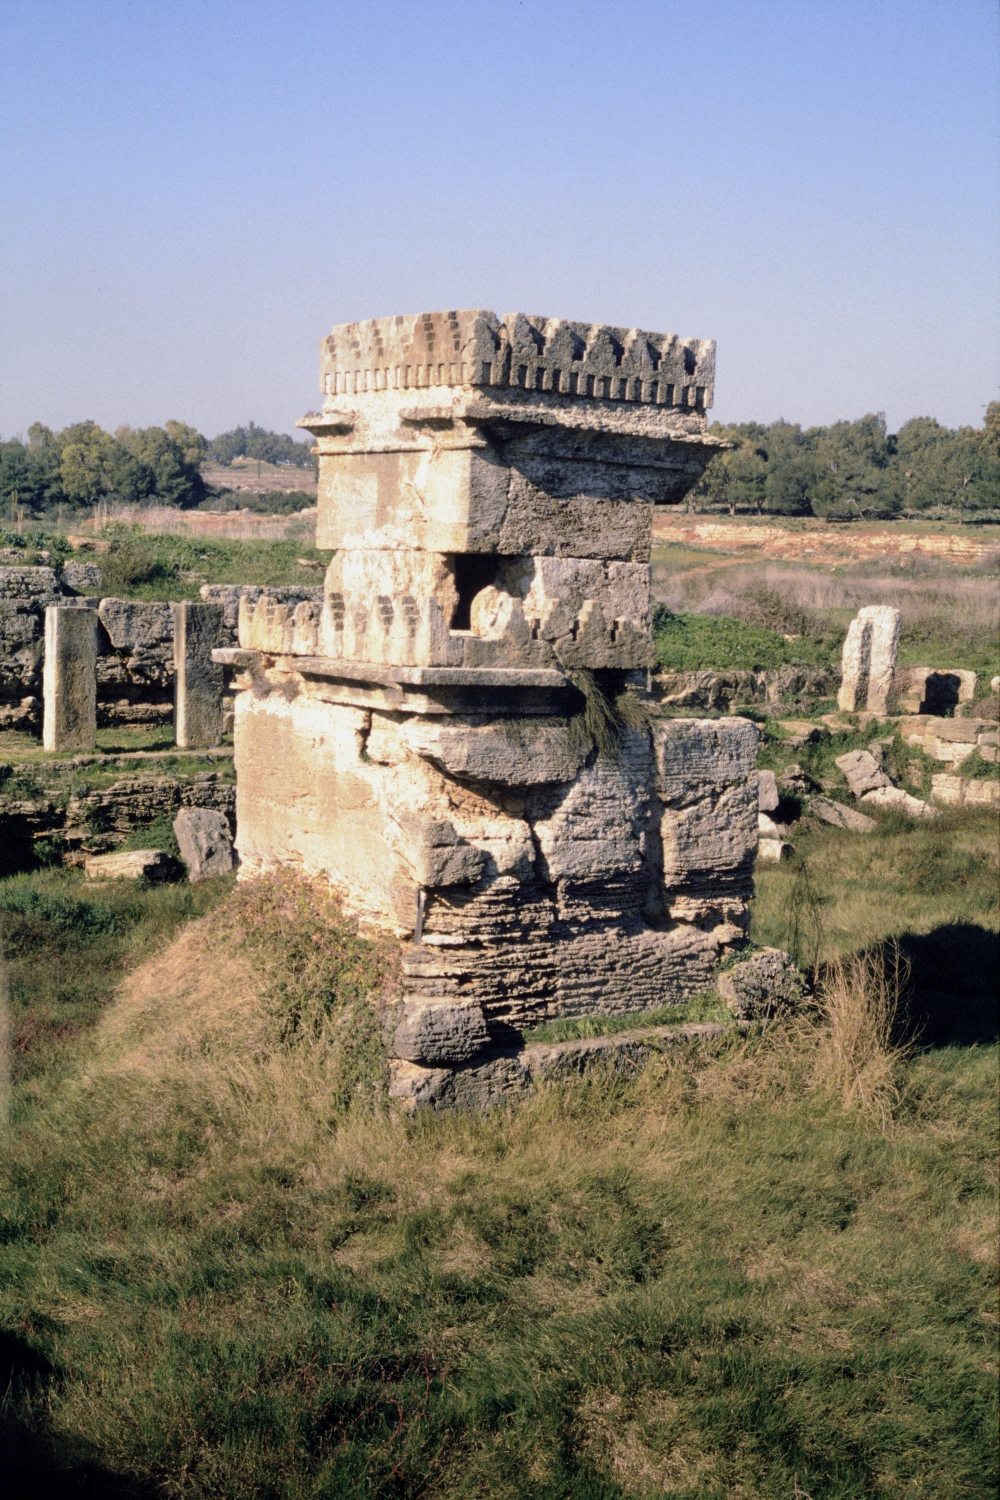 View of the temple's cella